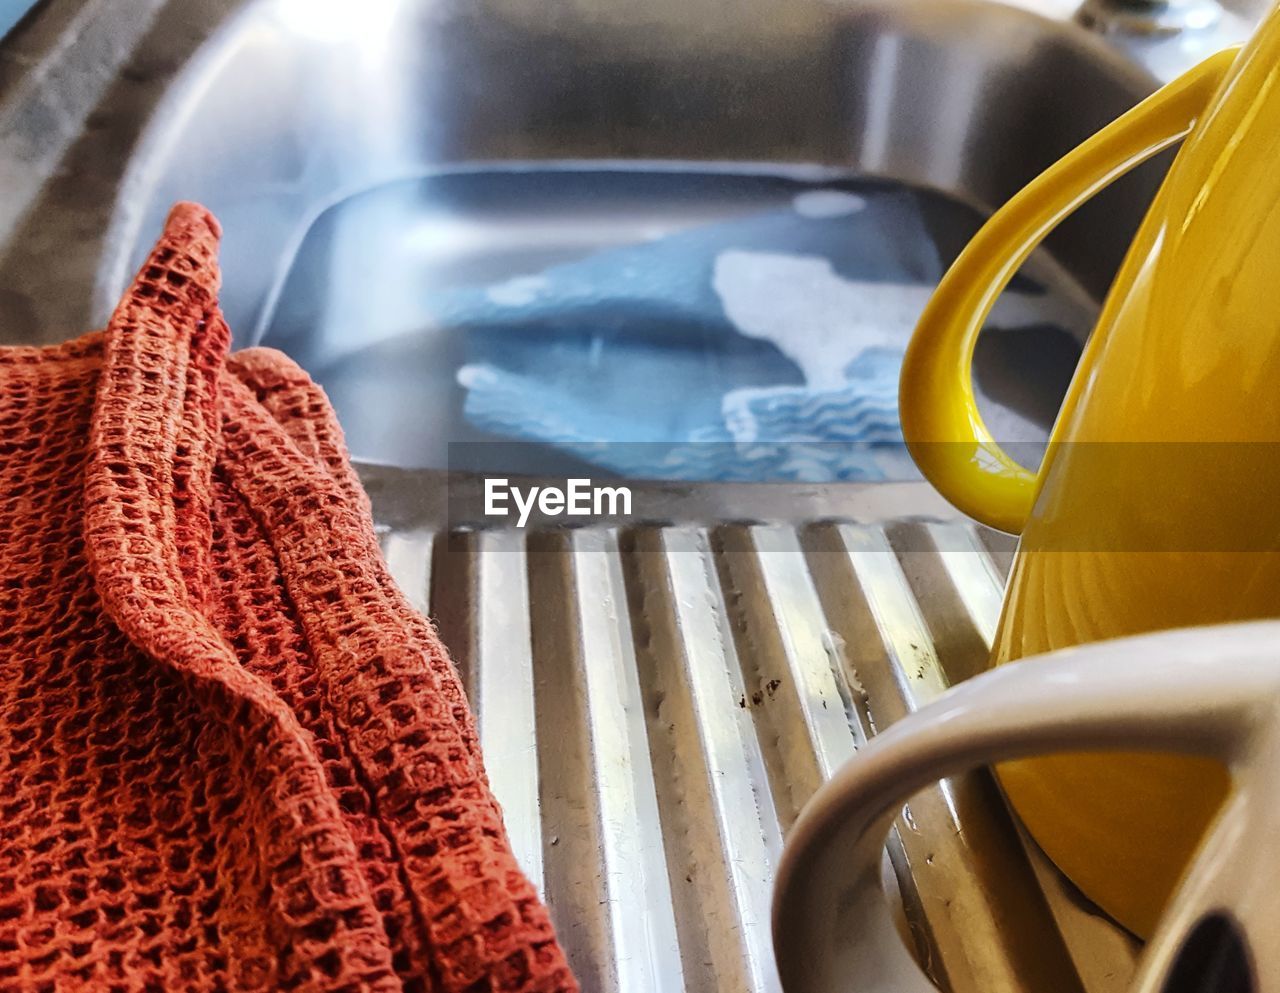 High angle view of fabric in sink